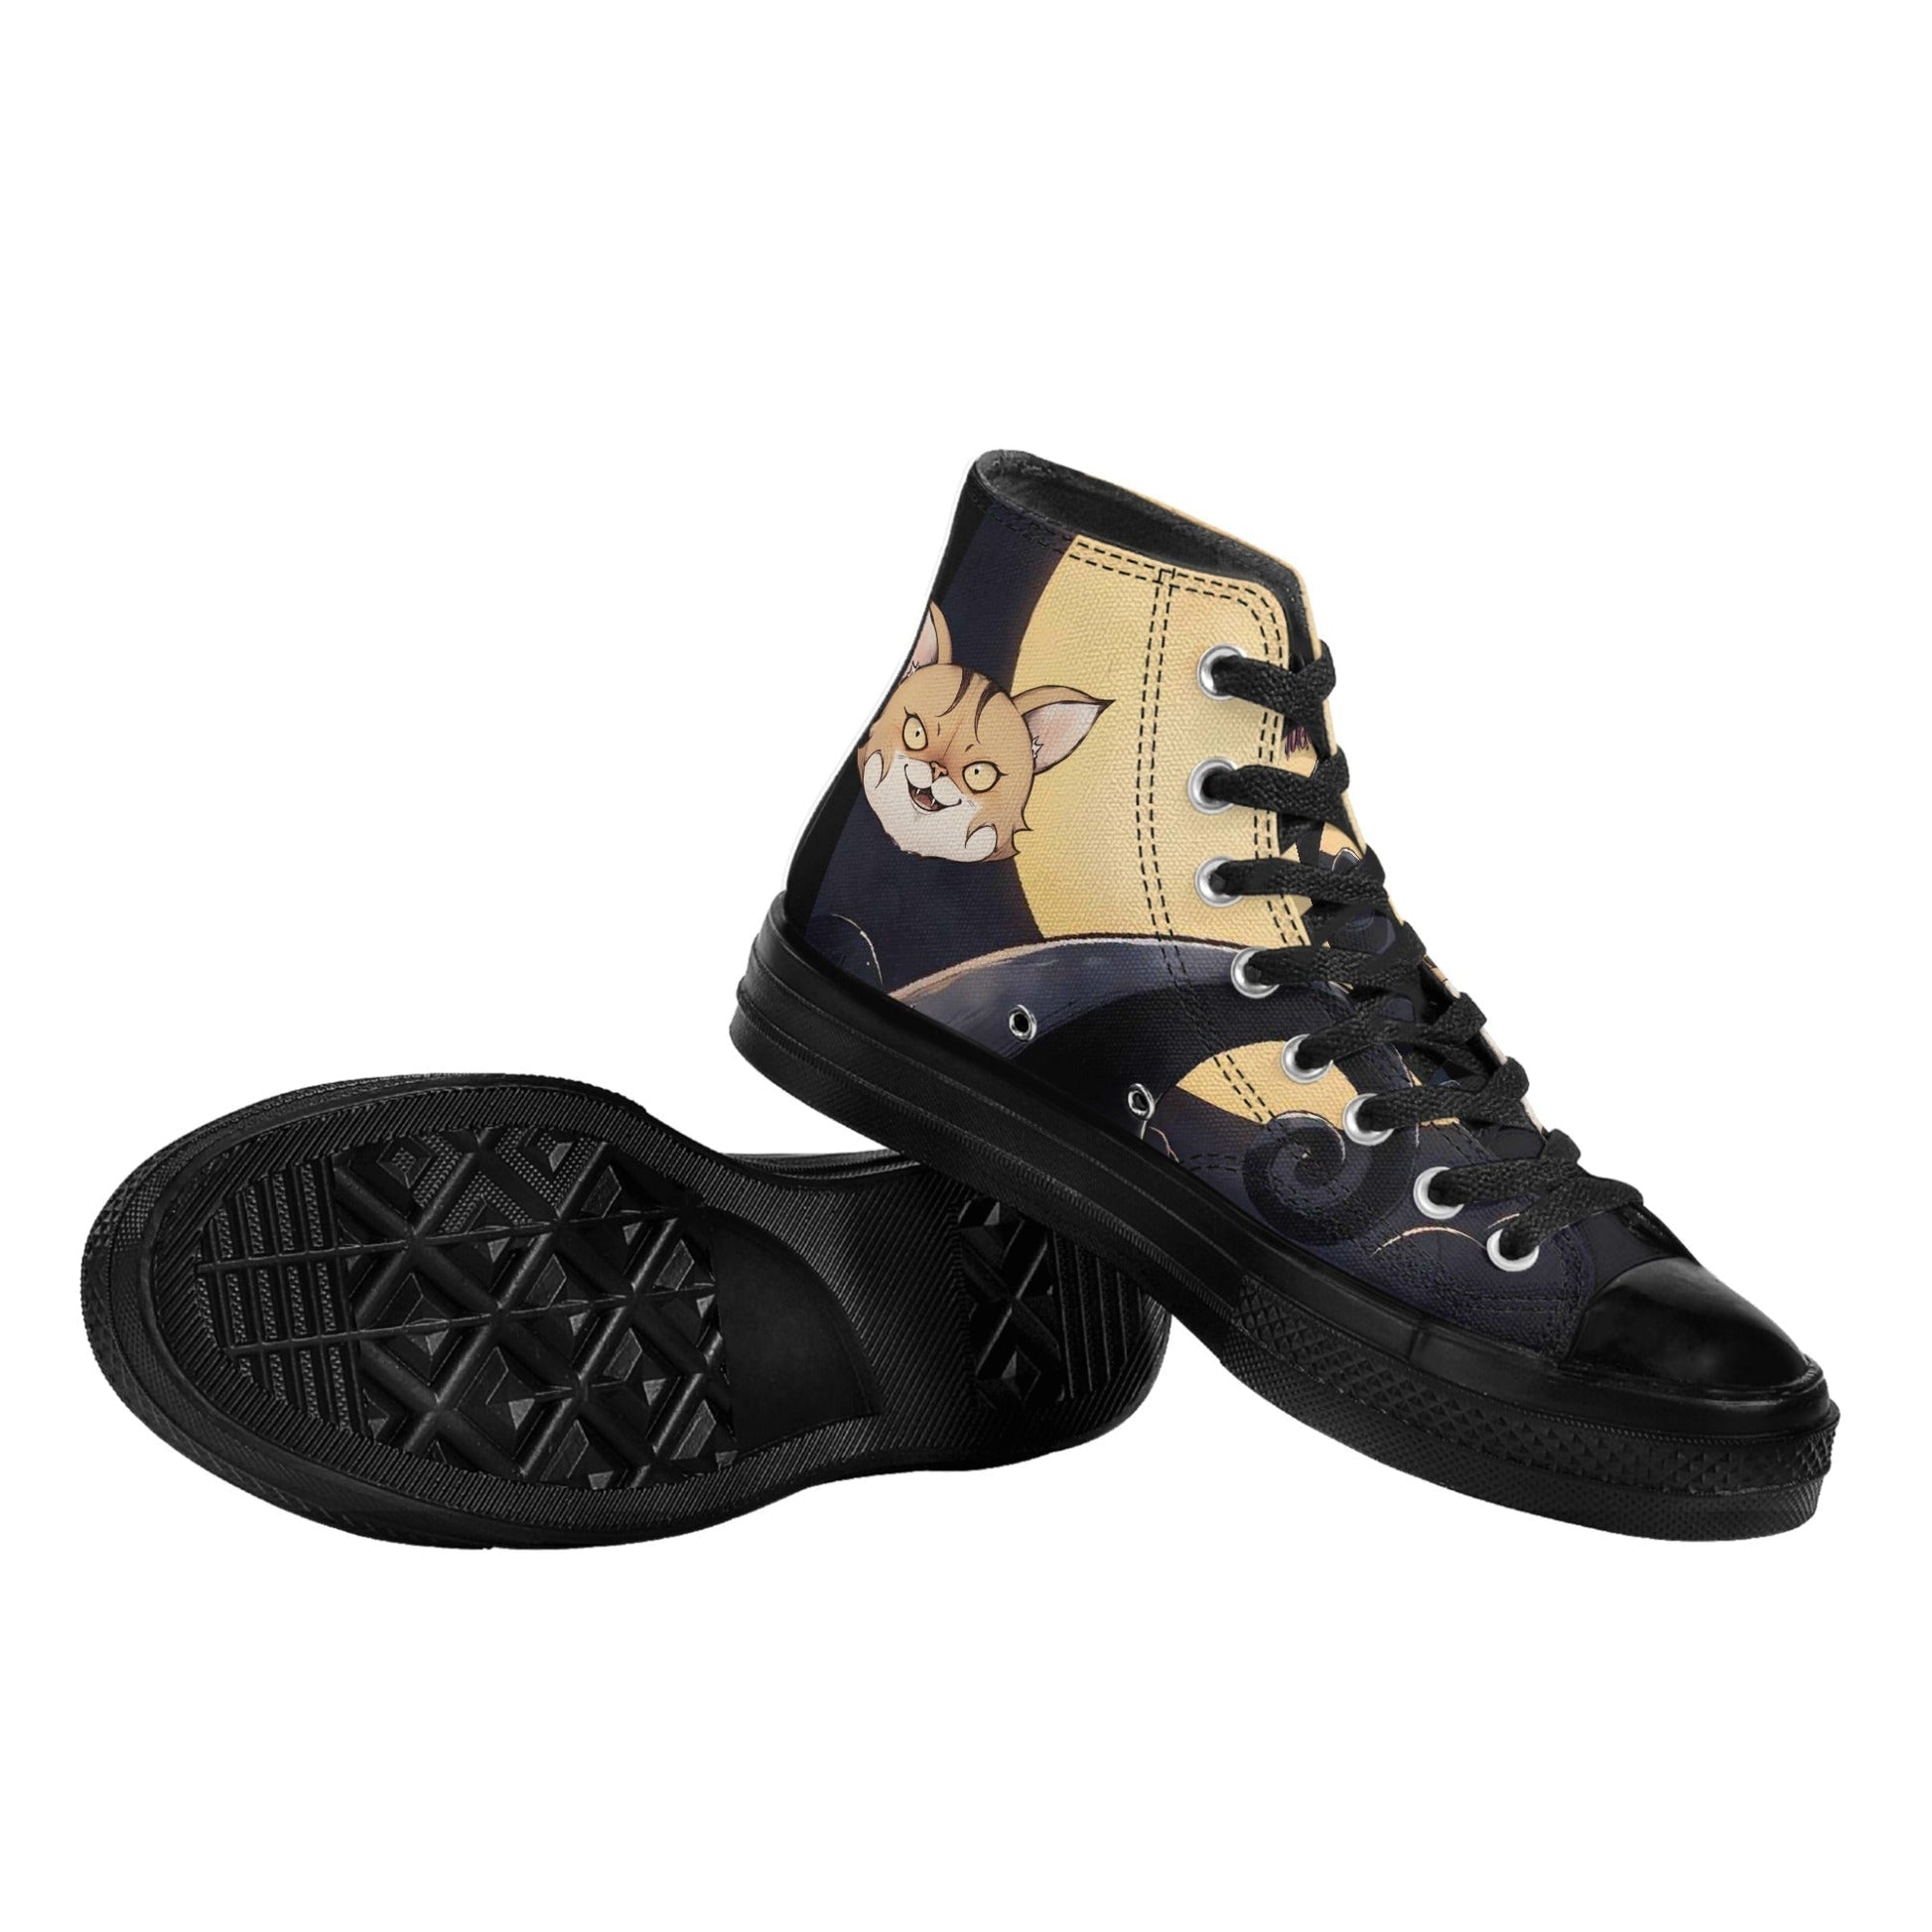 Stand out  with the  Nightmare Before HeyNugget Womens Classic Black High Top Canvas Shoes  available at Hey Nugget. Grab yours today!